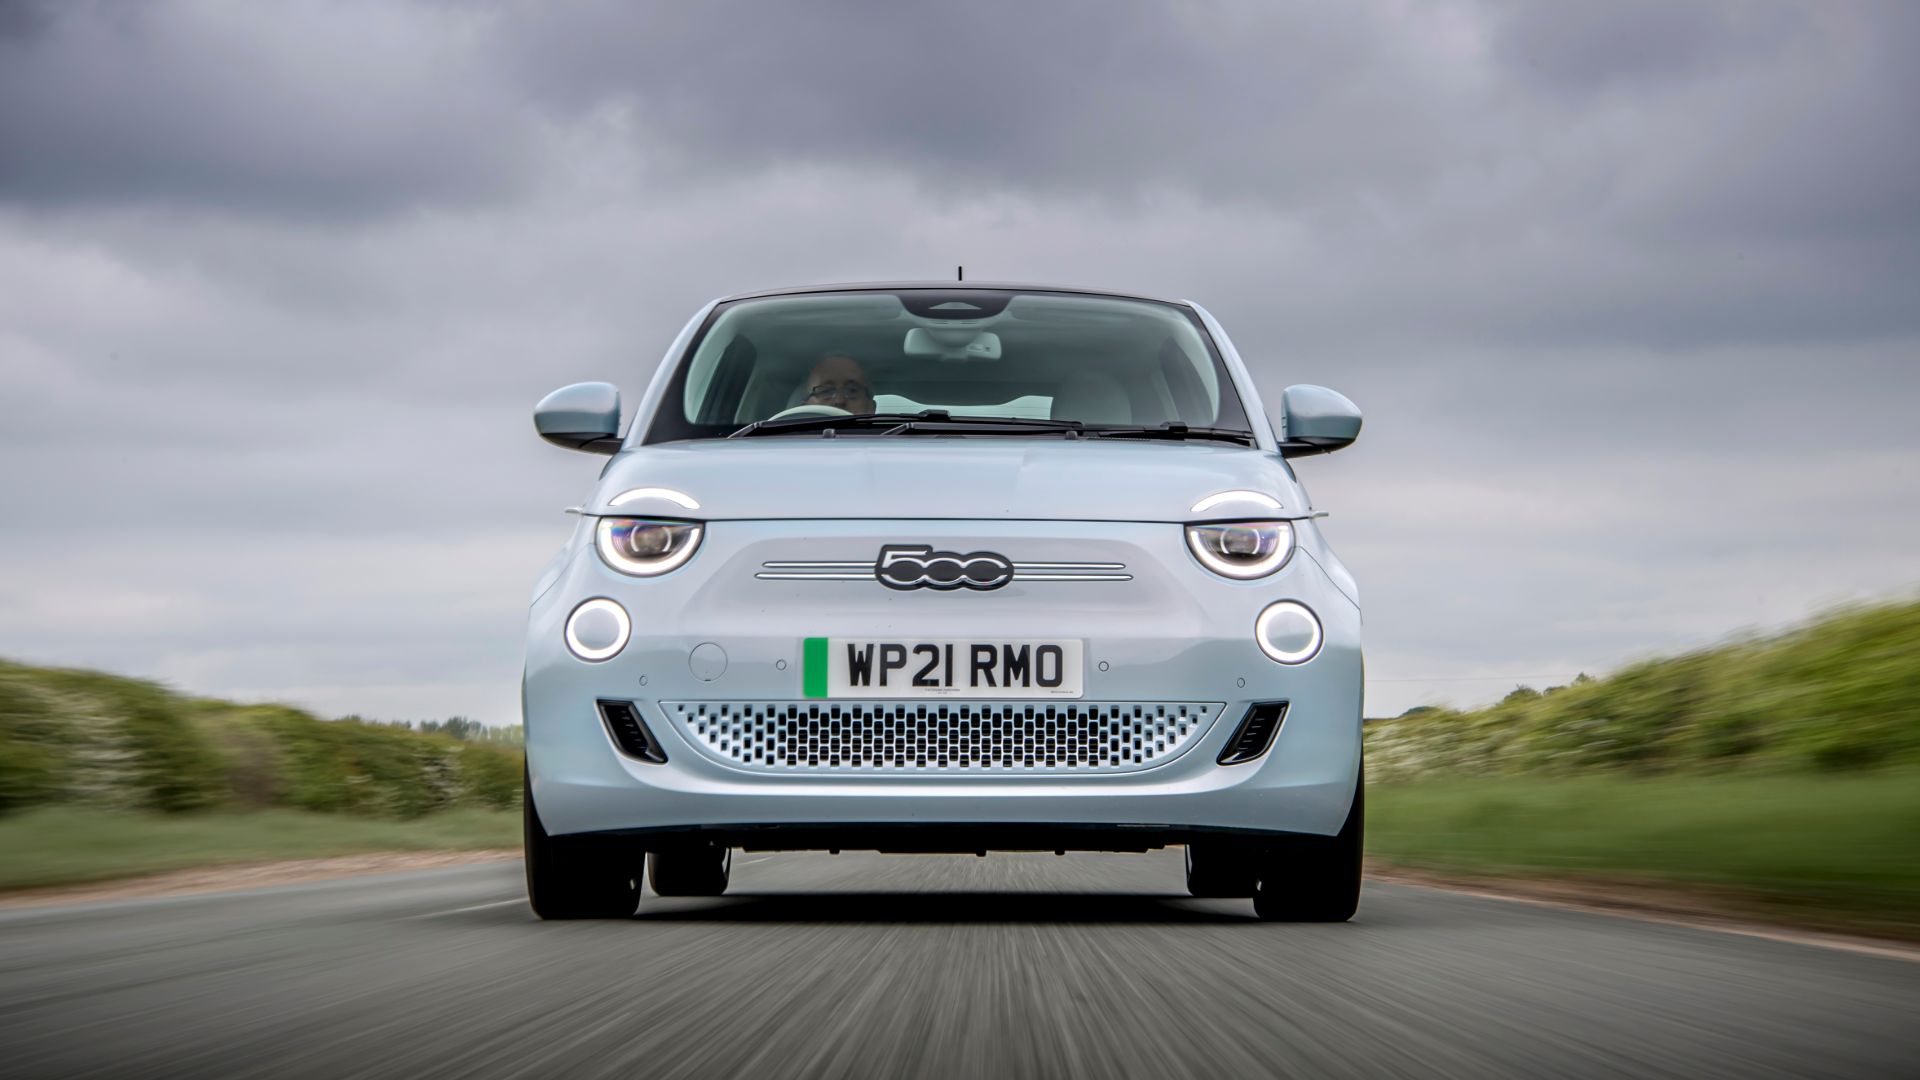 Fiat warns government must reinstate electric car grants amid sales slowdown